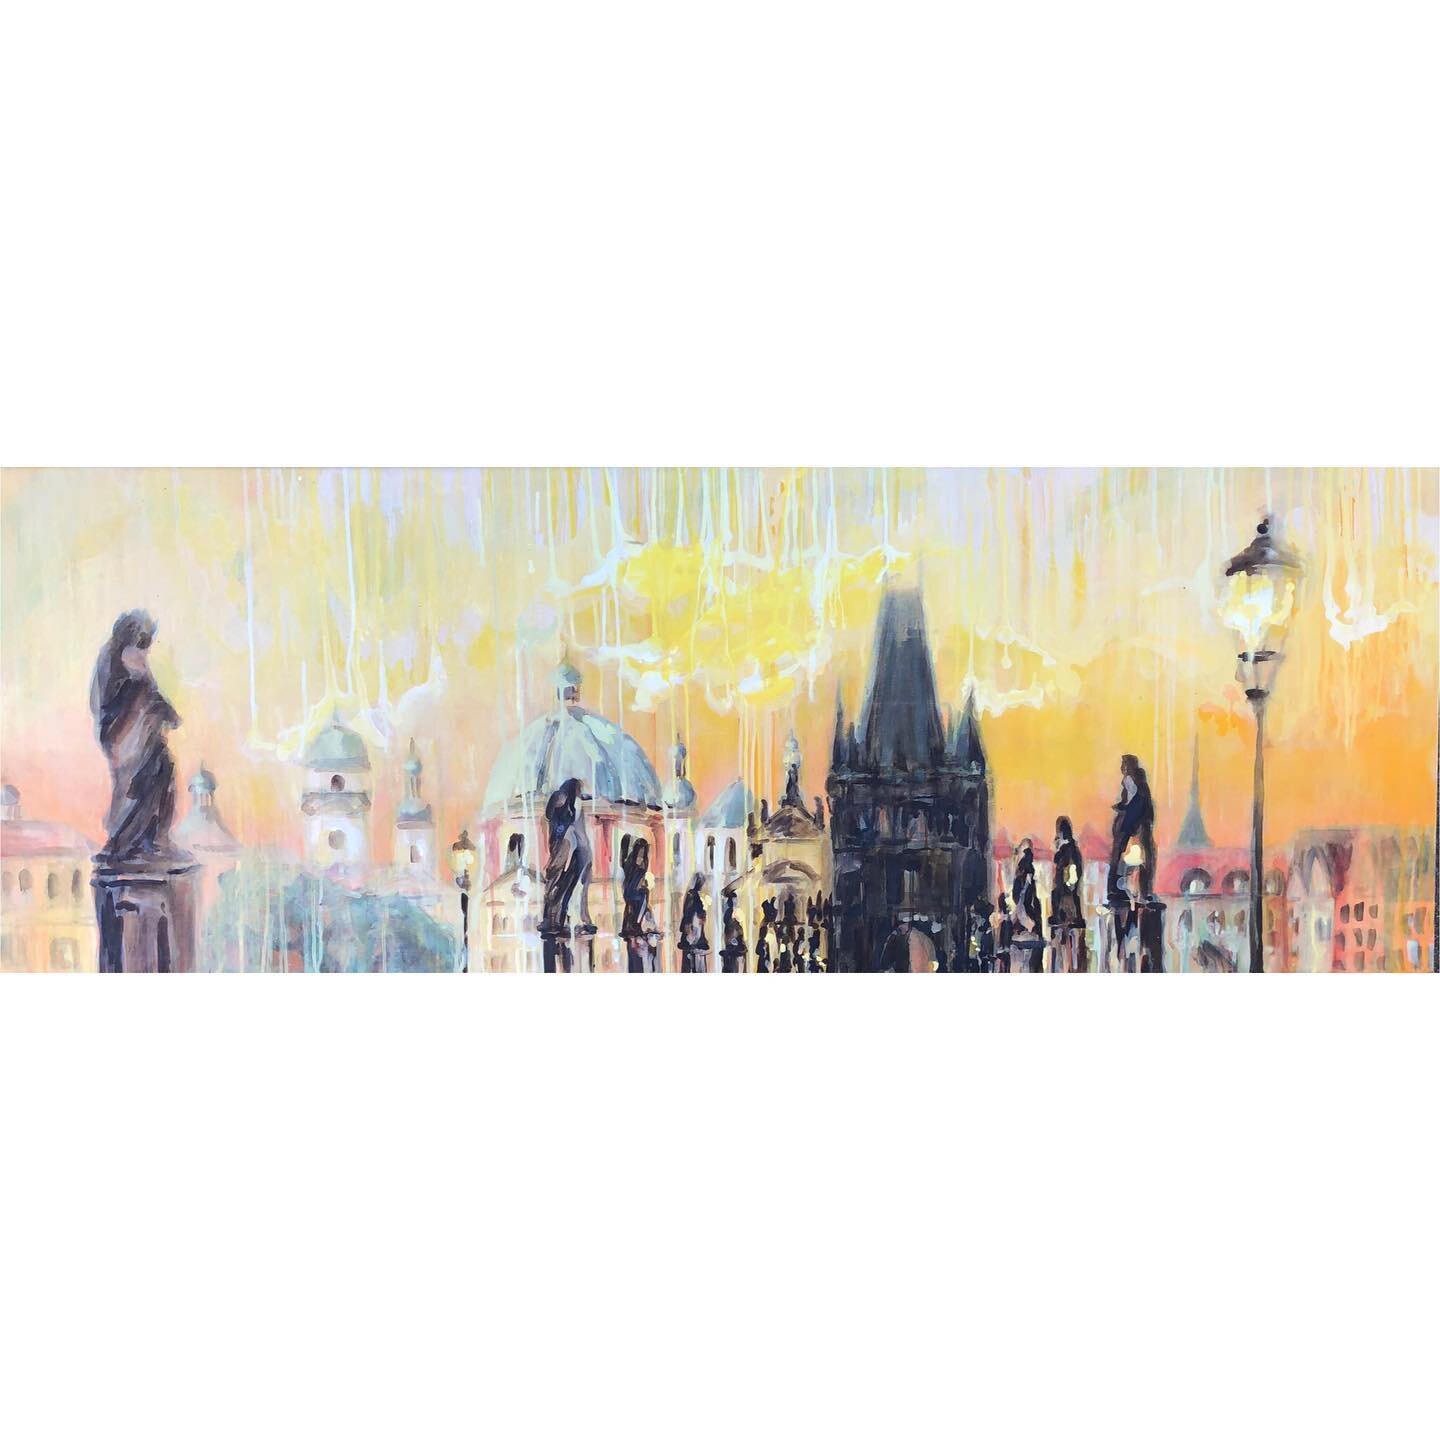 Can you recognize the city? It has many nicknames: the City of 100 spires, the Heart of Europe, the Mother of cities, the Golden City, the Rooftop of Europe. 
Here are some snapshots from my most recent painting of it.

50 x 140 cm, oil on canvas, pr